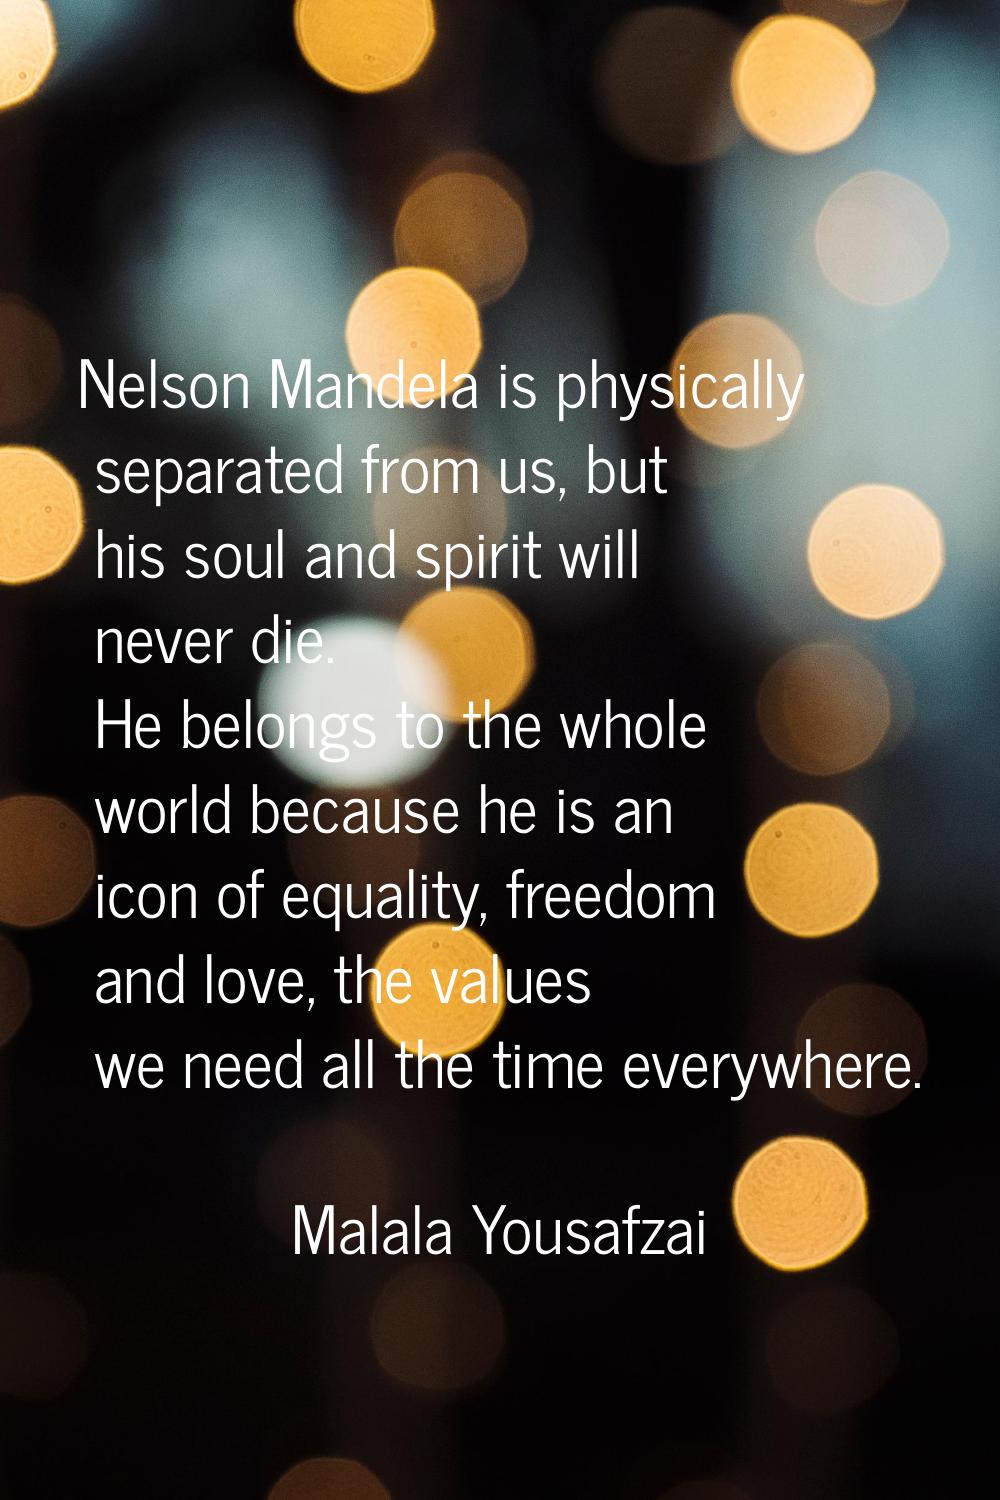 Nelson Mandela is physically separated from us, but his soul and spirit will never die. He belongs 